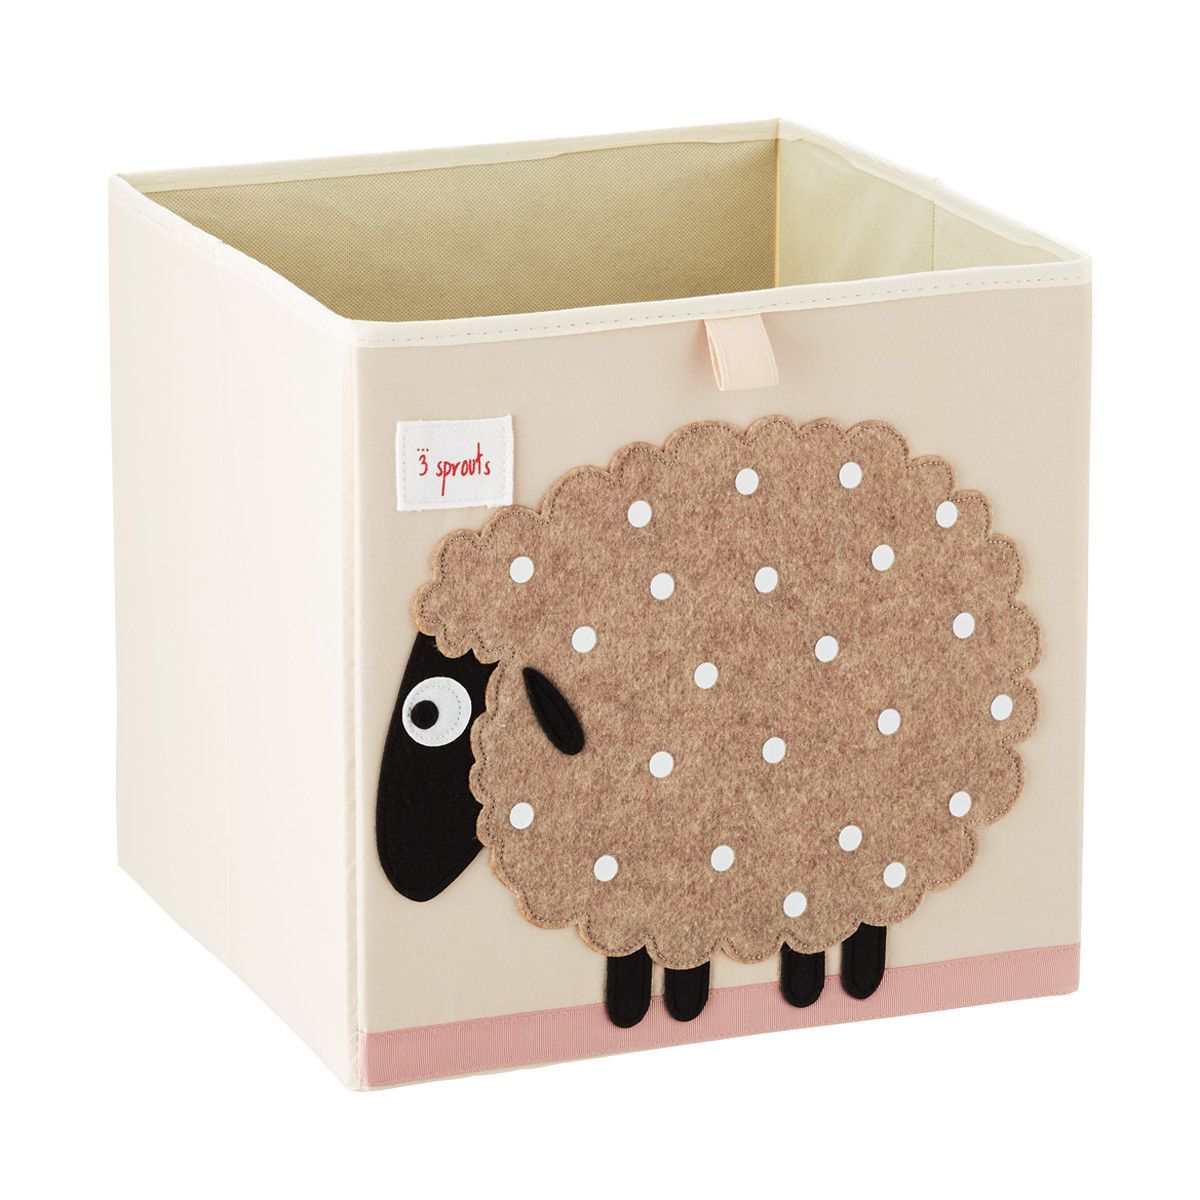 Sheep - 3 Sprouts Storage Cube | The Container Store